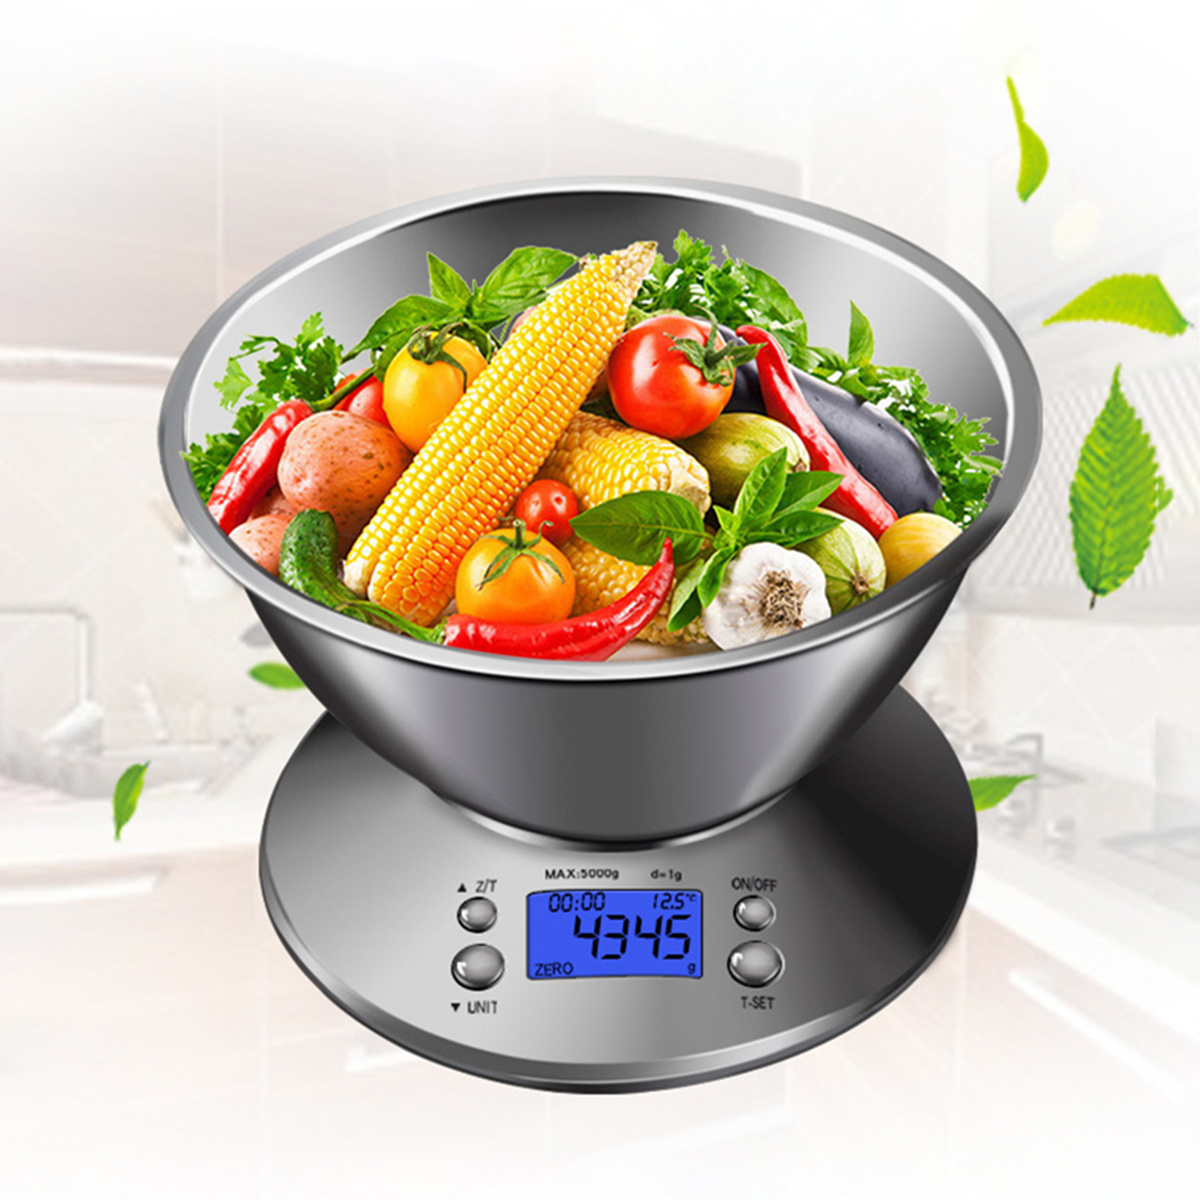 LCD Compact 5Kg /11lbs Digital Kitchen Diet Food Scale Removable Bowl